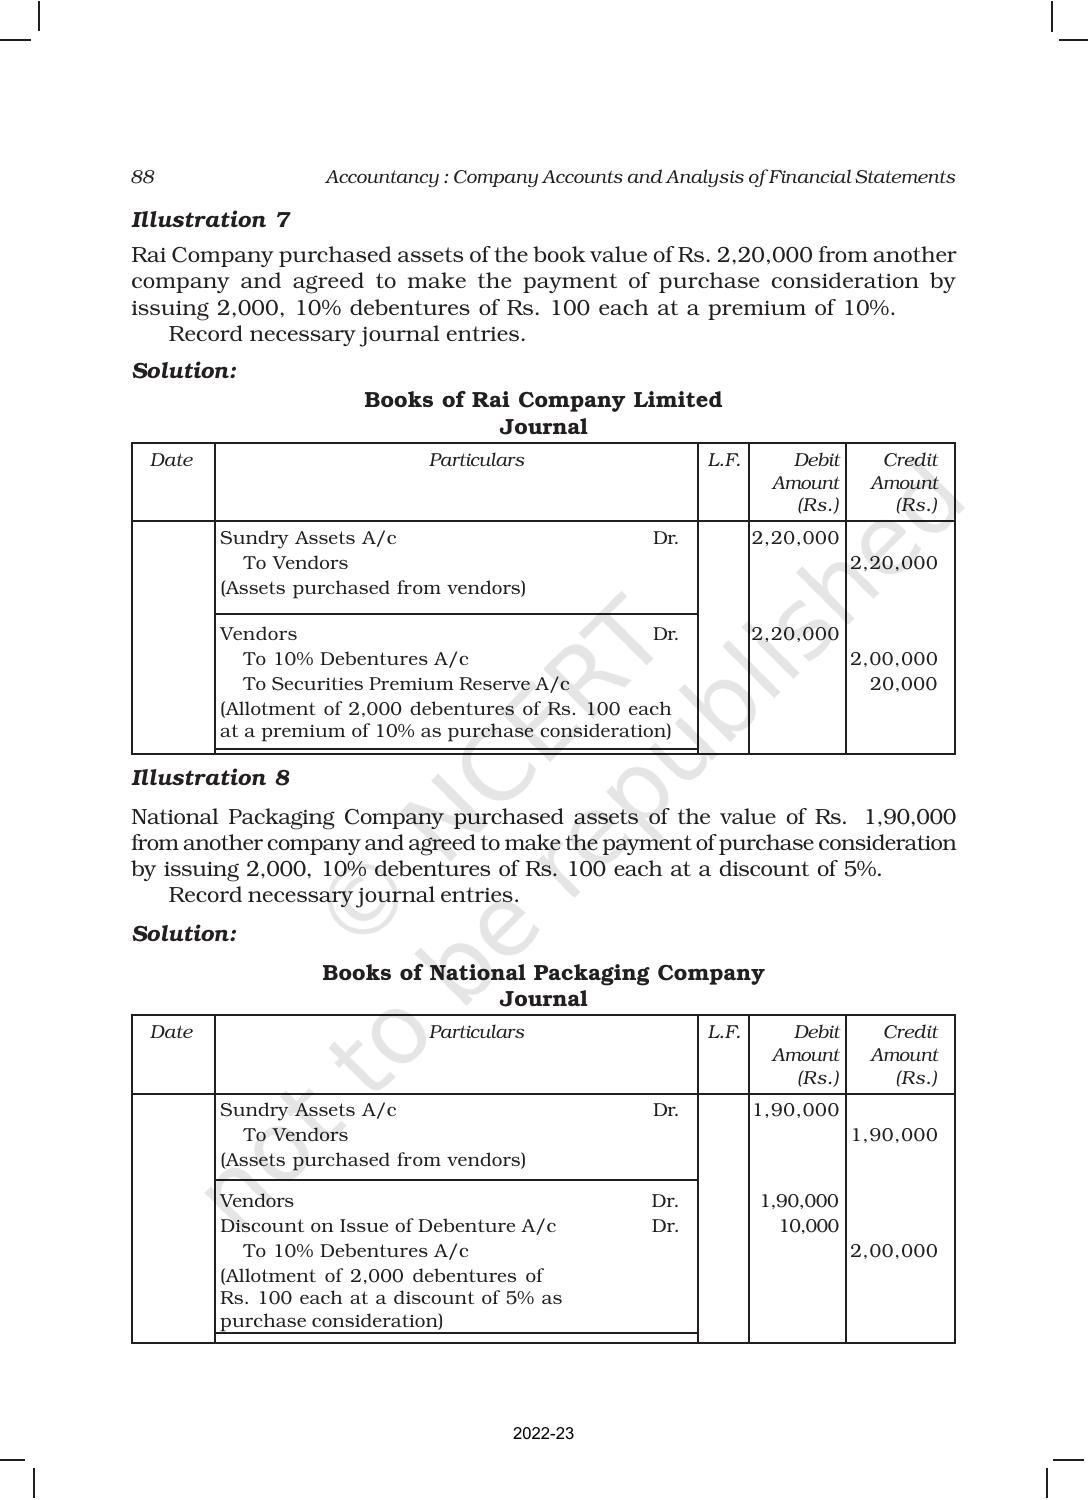 NCERT Book for Class 12 Accountancy Part II Chapter 1 Issue and Redemption of Debentures - Page 14